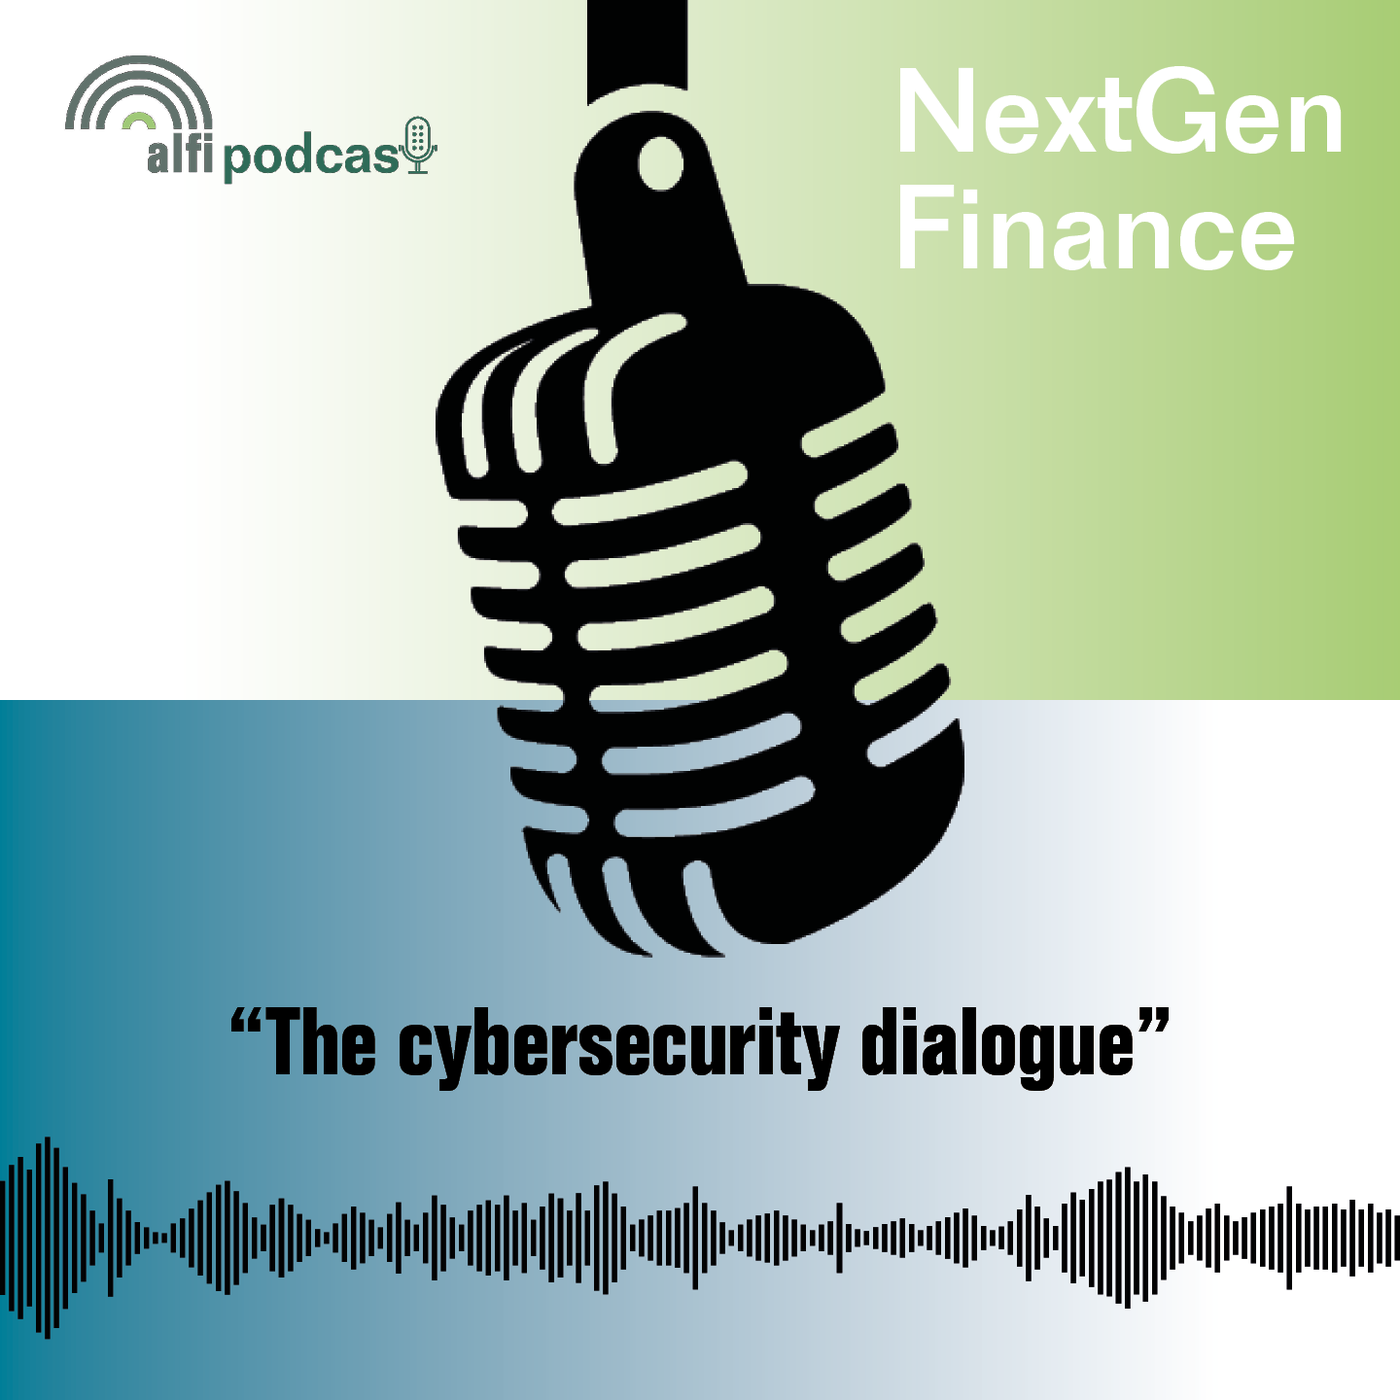 The cybersecurity dialogue